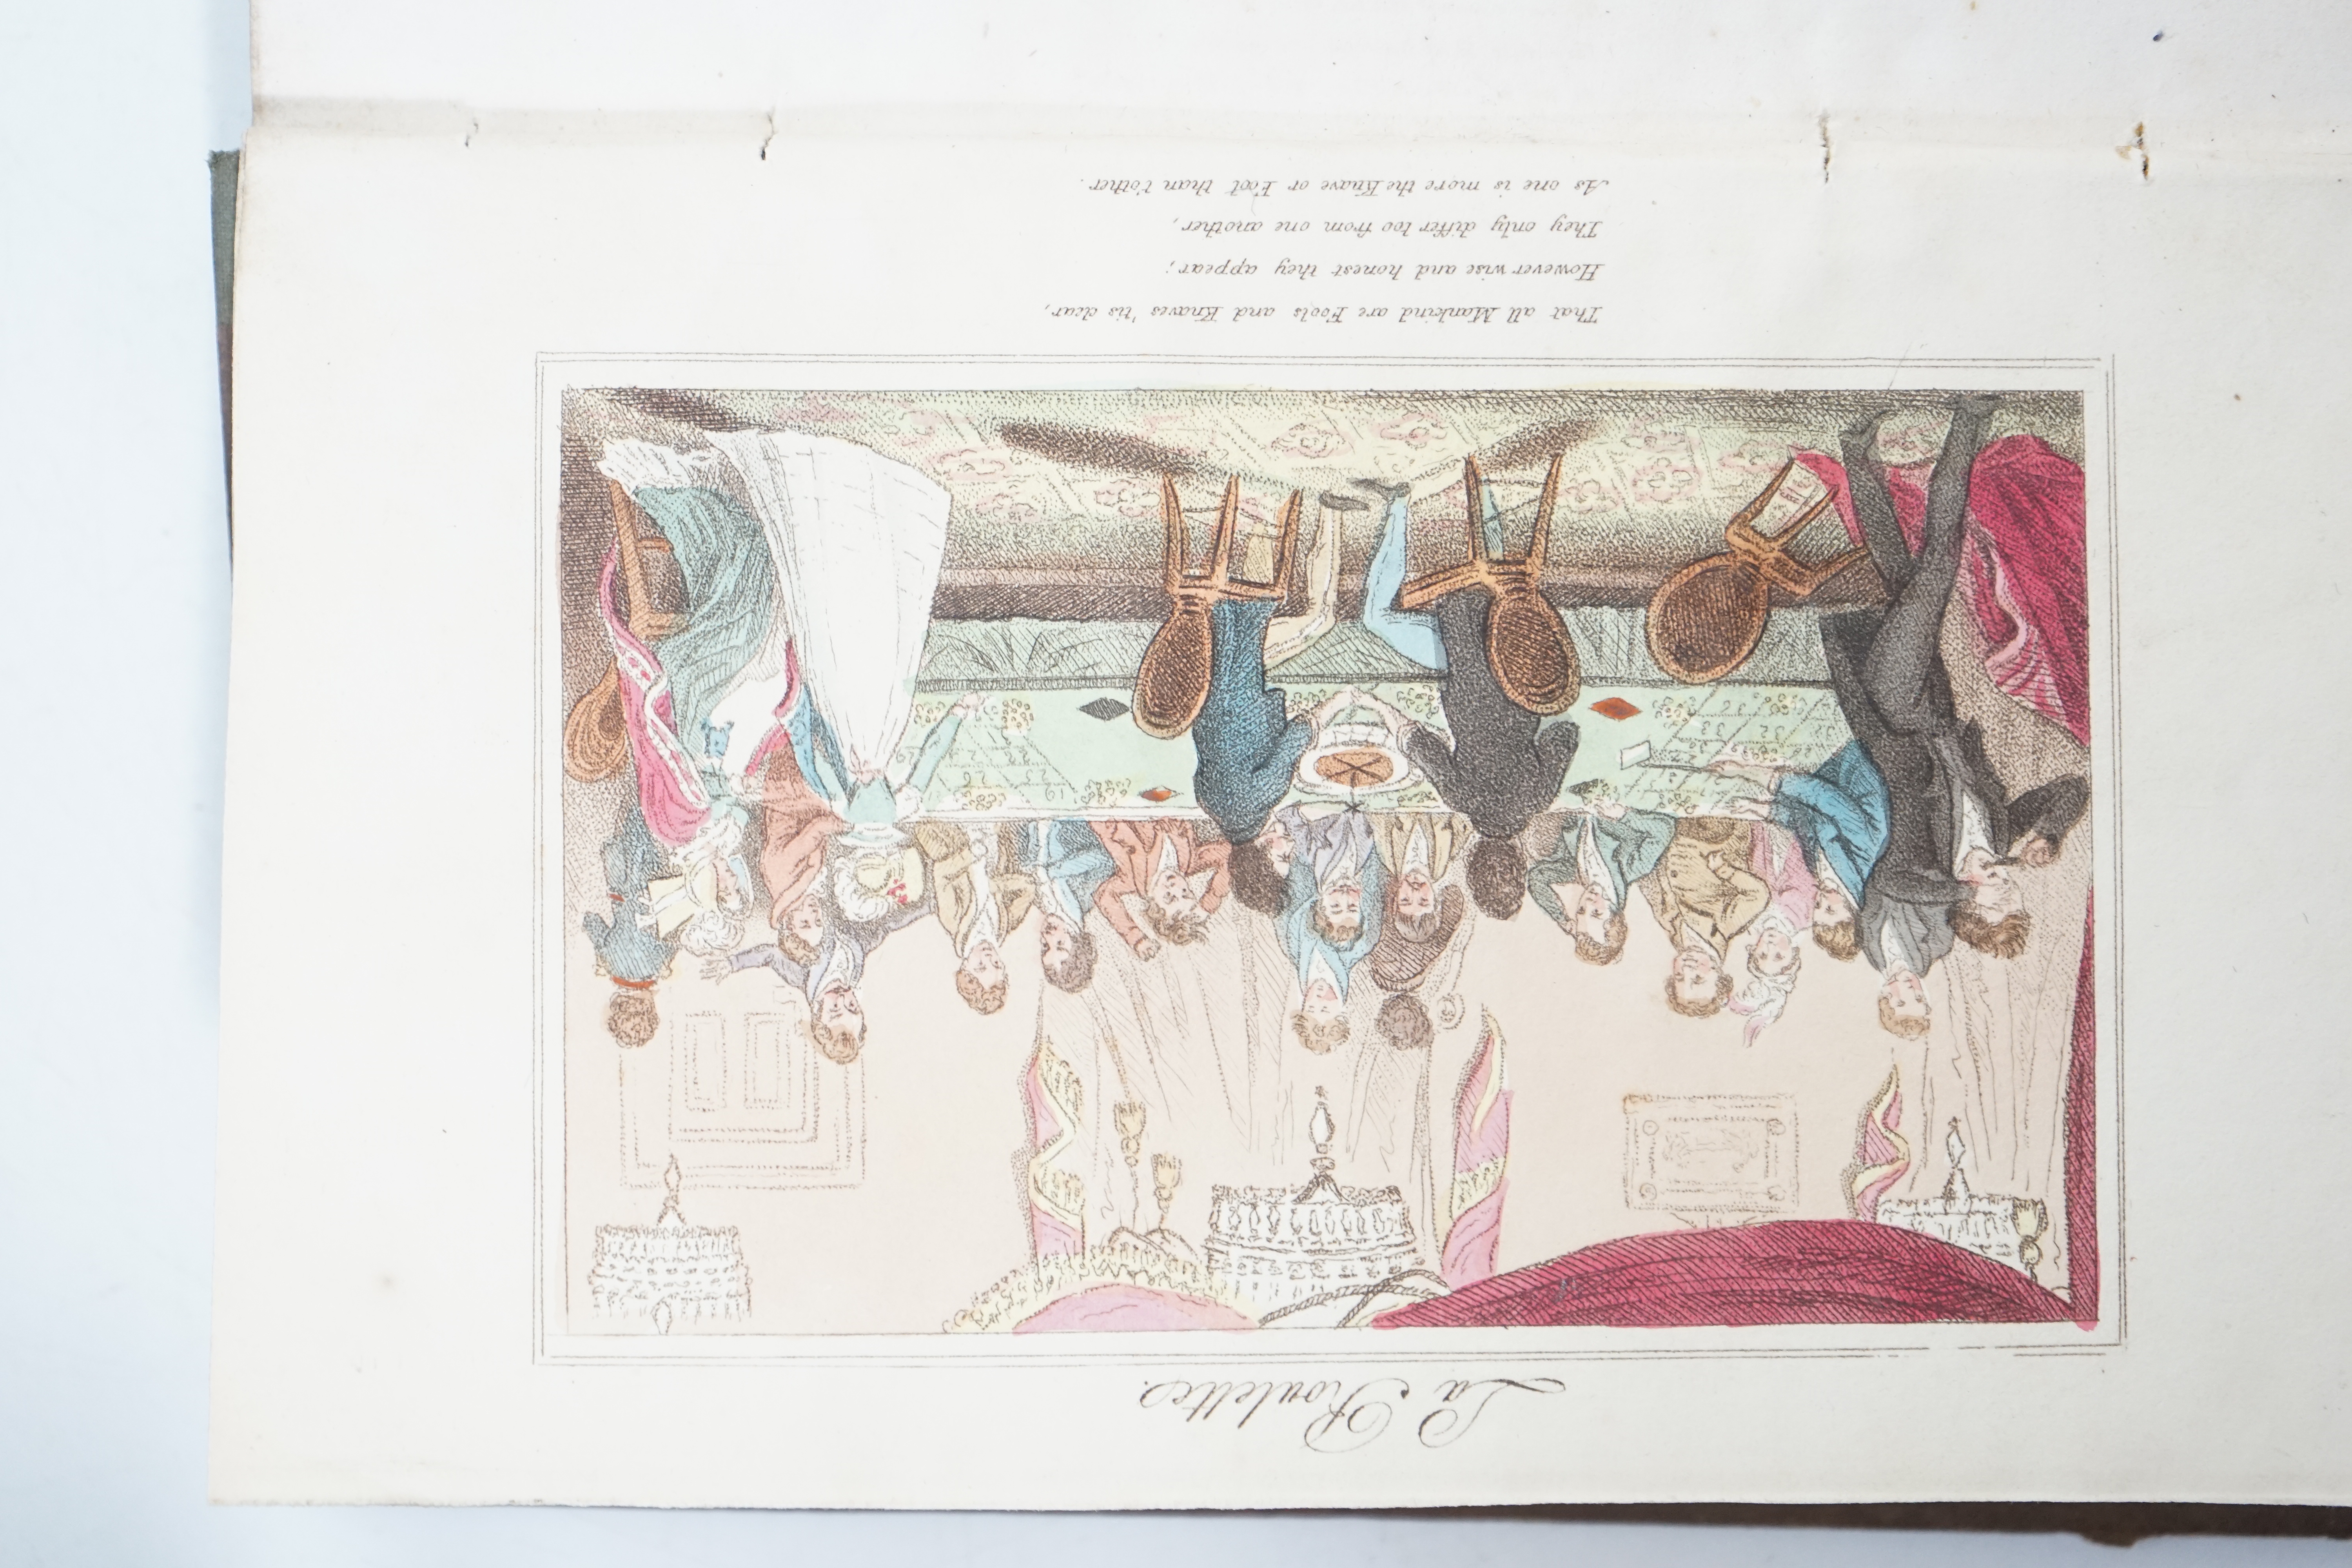 Persius, Charles [Dunne, Charles] - The Academicians of 1823; or, the Greeks of the Palais Royal, and the Clubs of St. James’s, 8vo, quarter cloth with drab boards, half title, hand-coloured engraved frontispiece of ‘’La